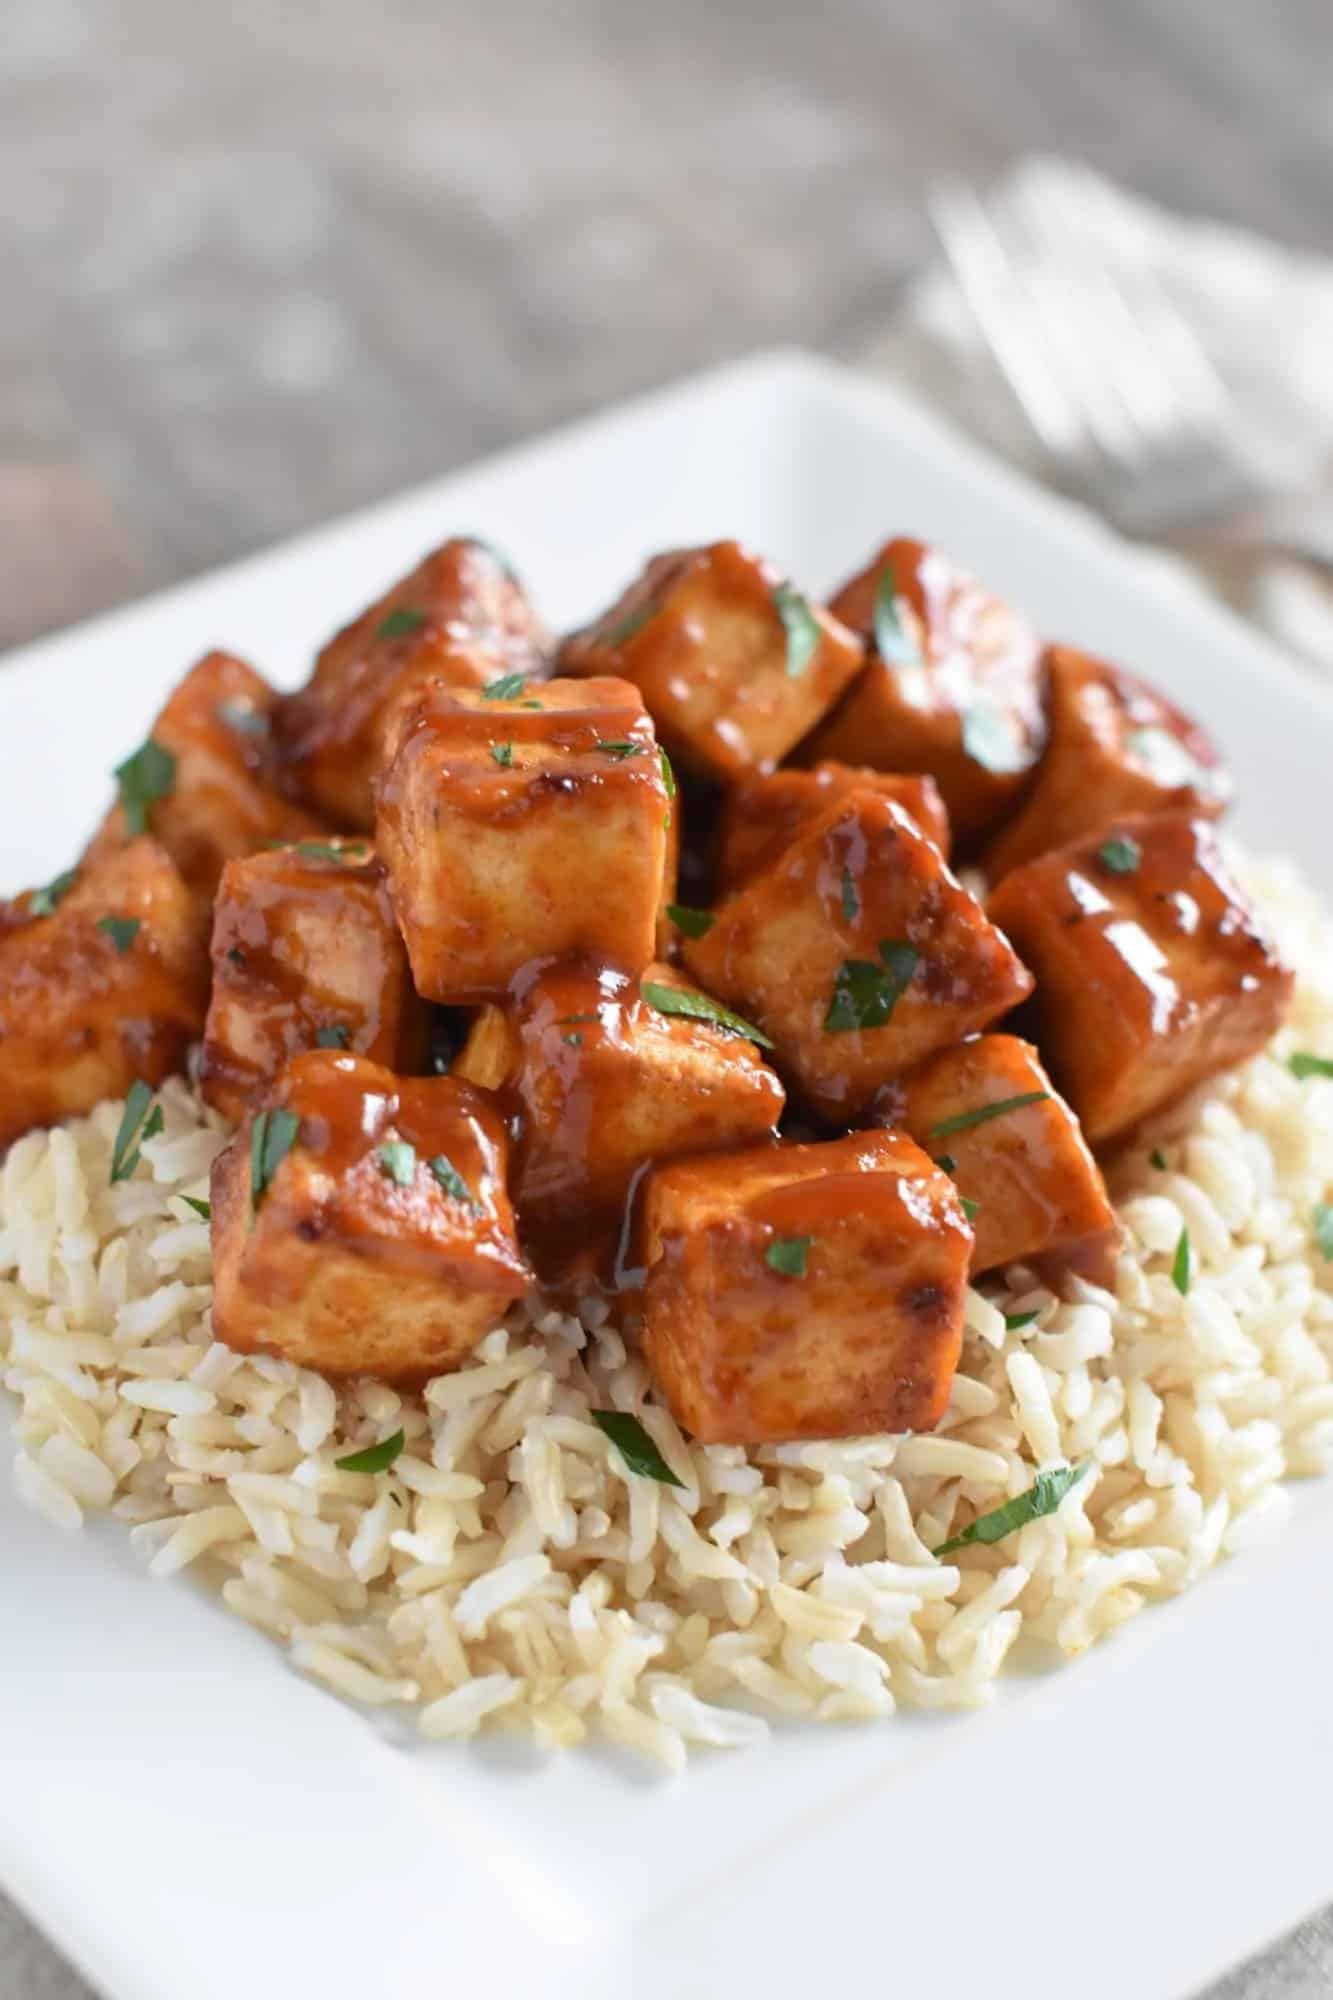 Baked tofu sits on a pile of white rice on a white plate.